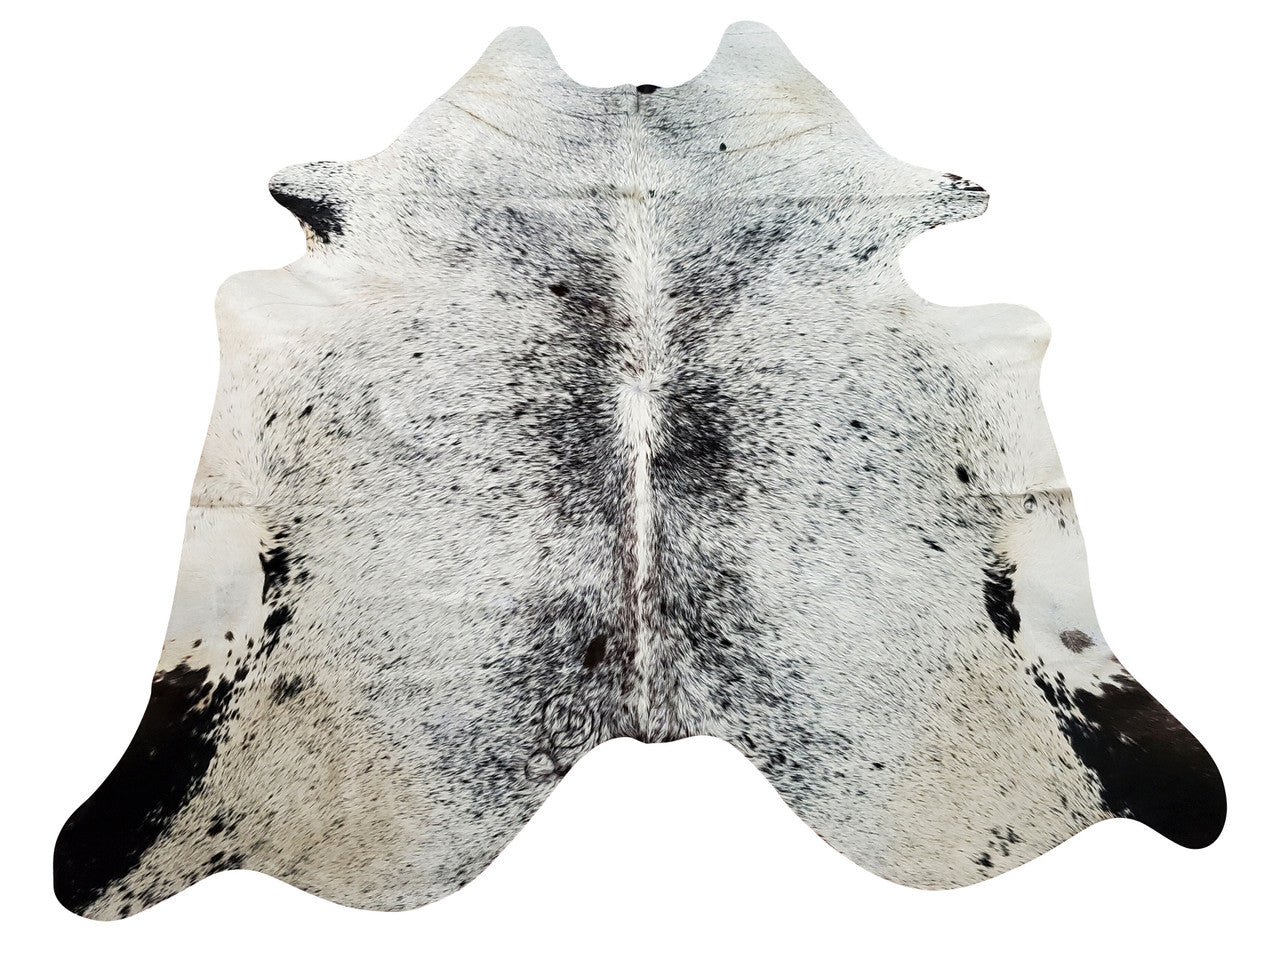 These small cowhide rugs are amazing if you have pets or kids running around your interior, natural hair on hides are easy to clean and long lasting.